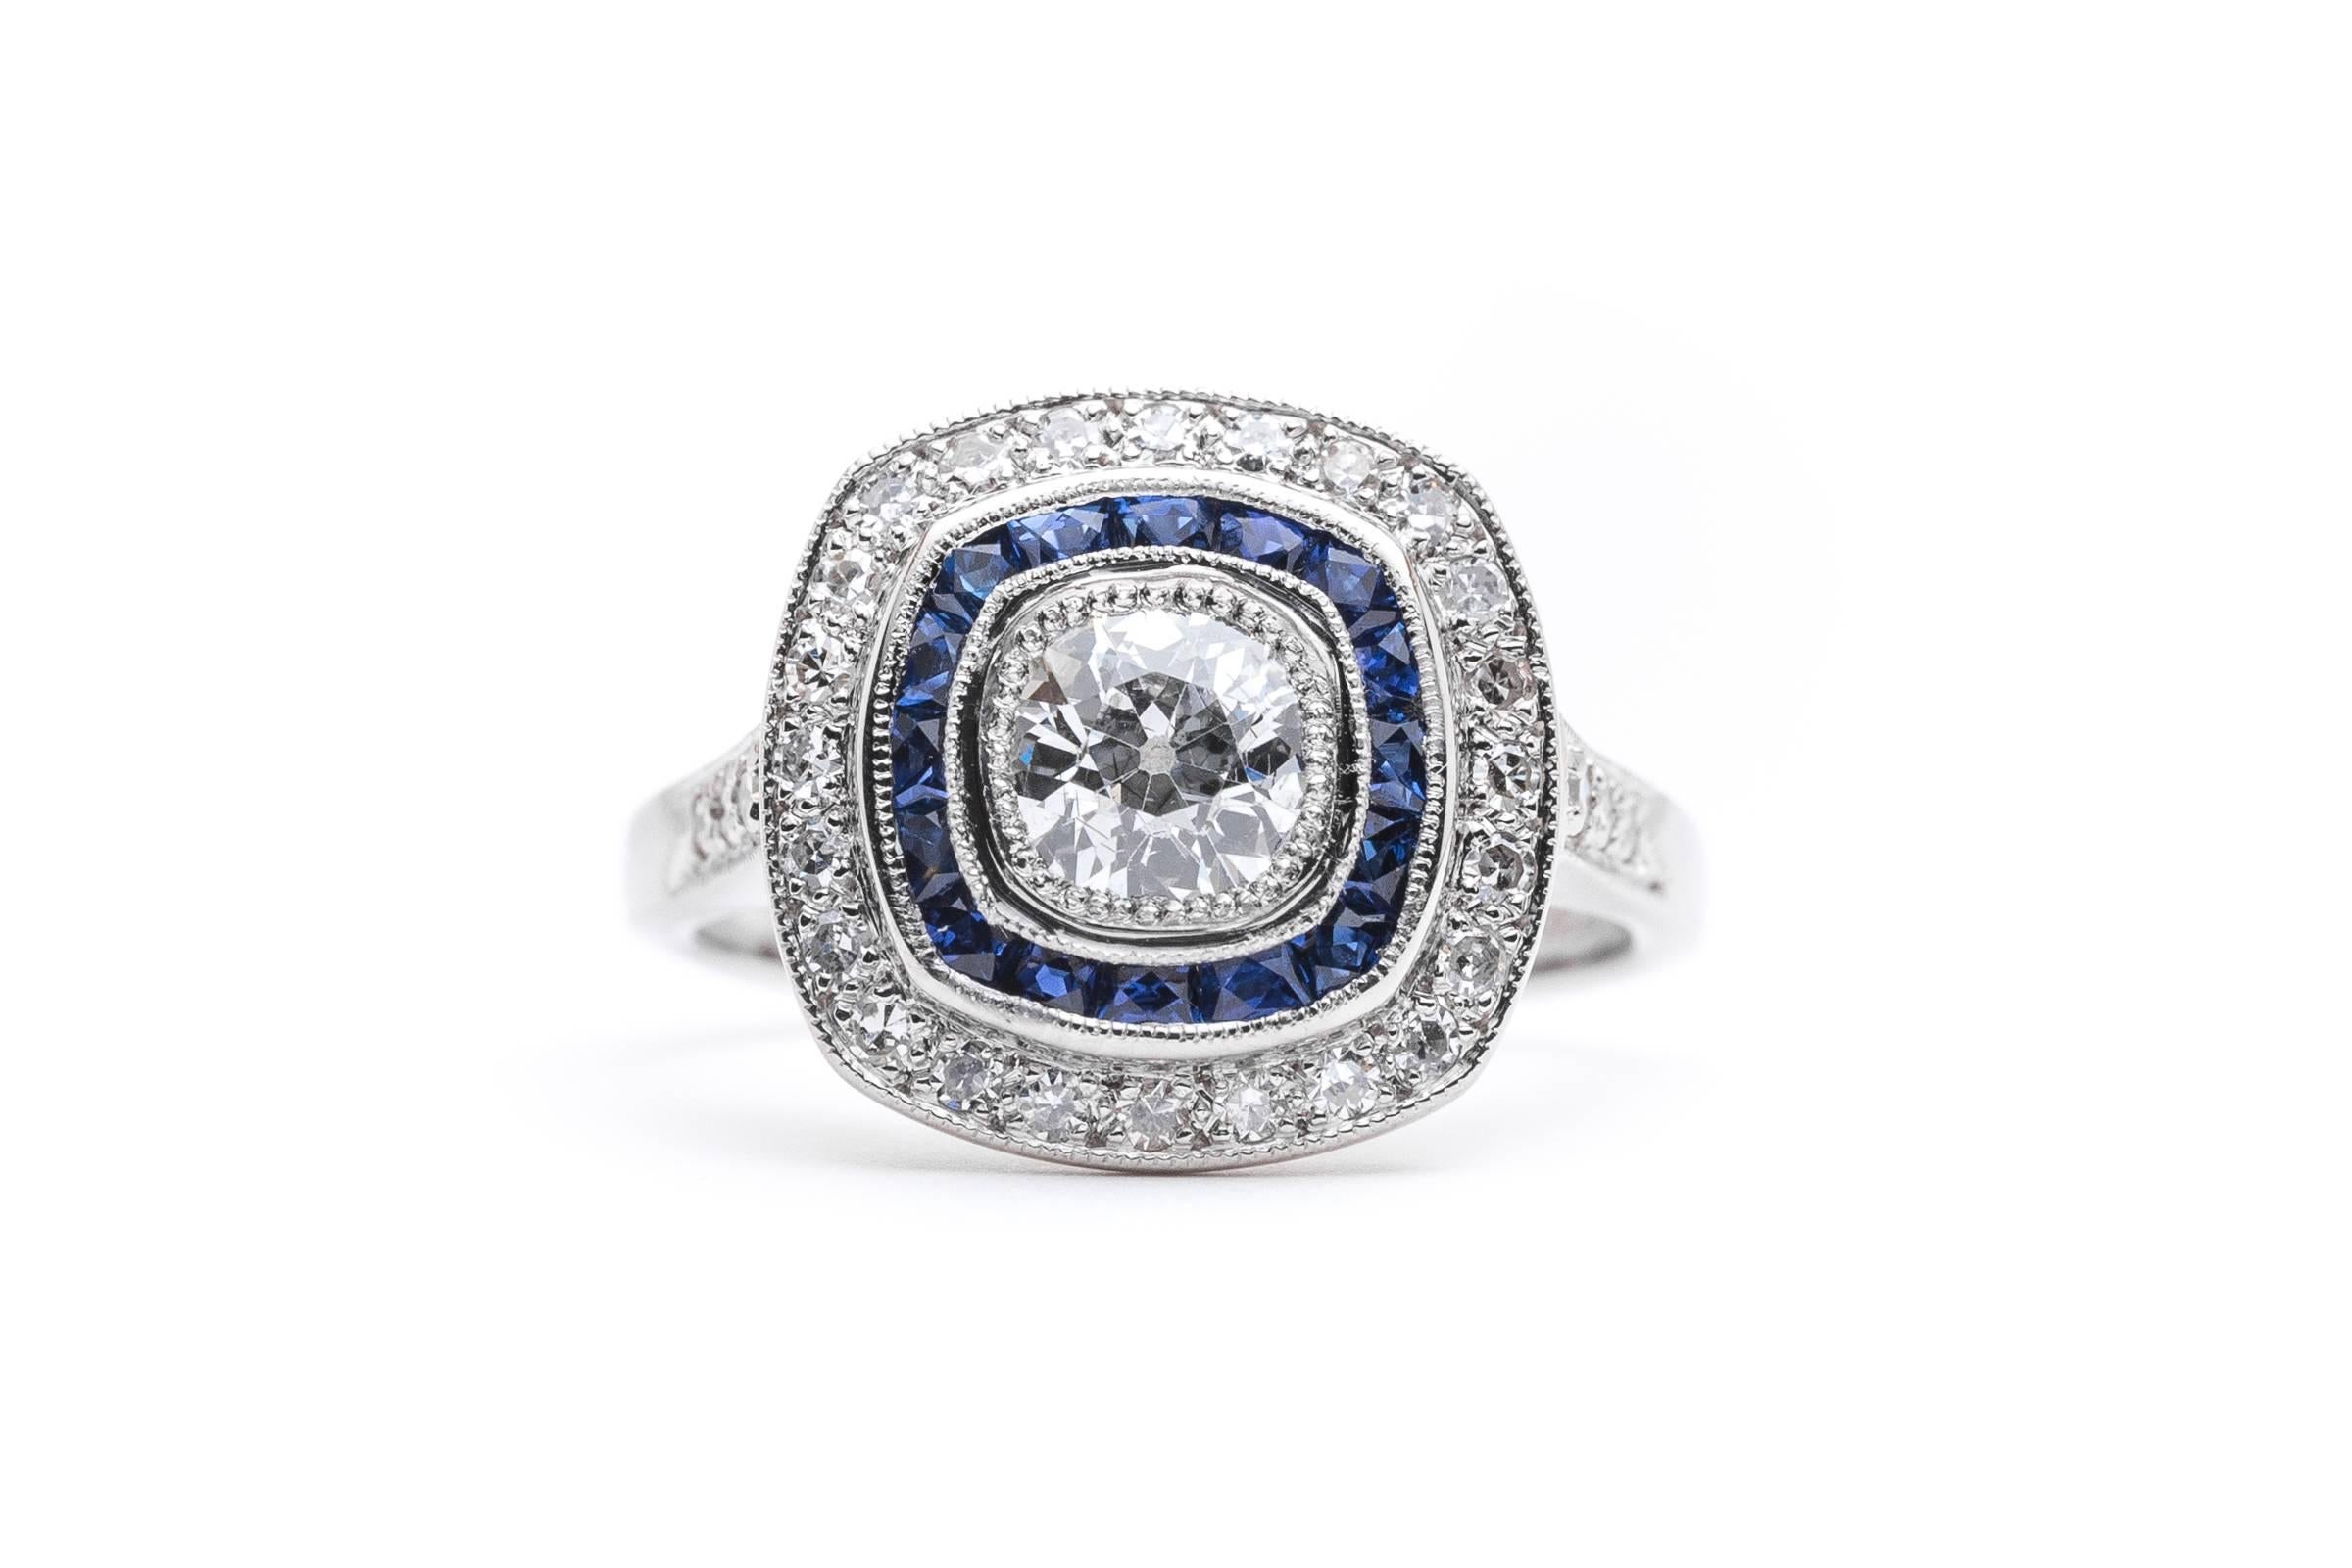 Beacon Hill Jewelers Presents:

A beautiful handmade French cut sapphire and European cut diamond ring in luxurious platinum. Centered by a sparkling old European cut diamond, this ring features an inner halo of French cut sapphire and an outer halo